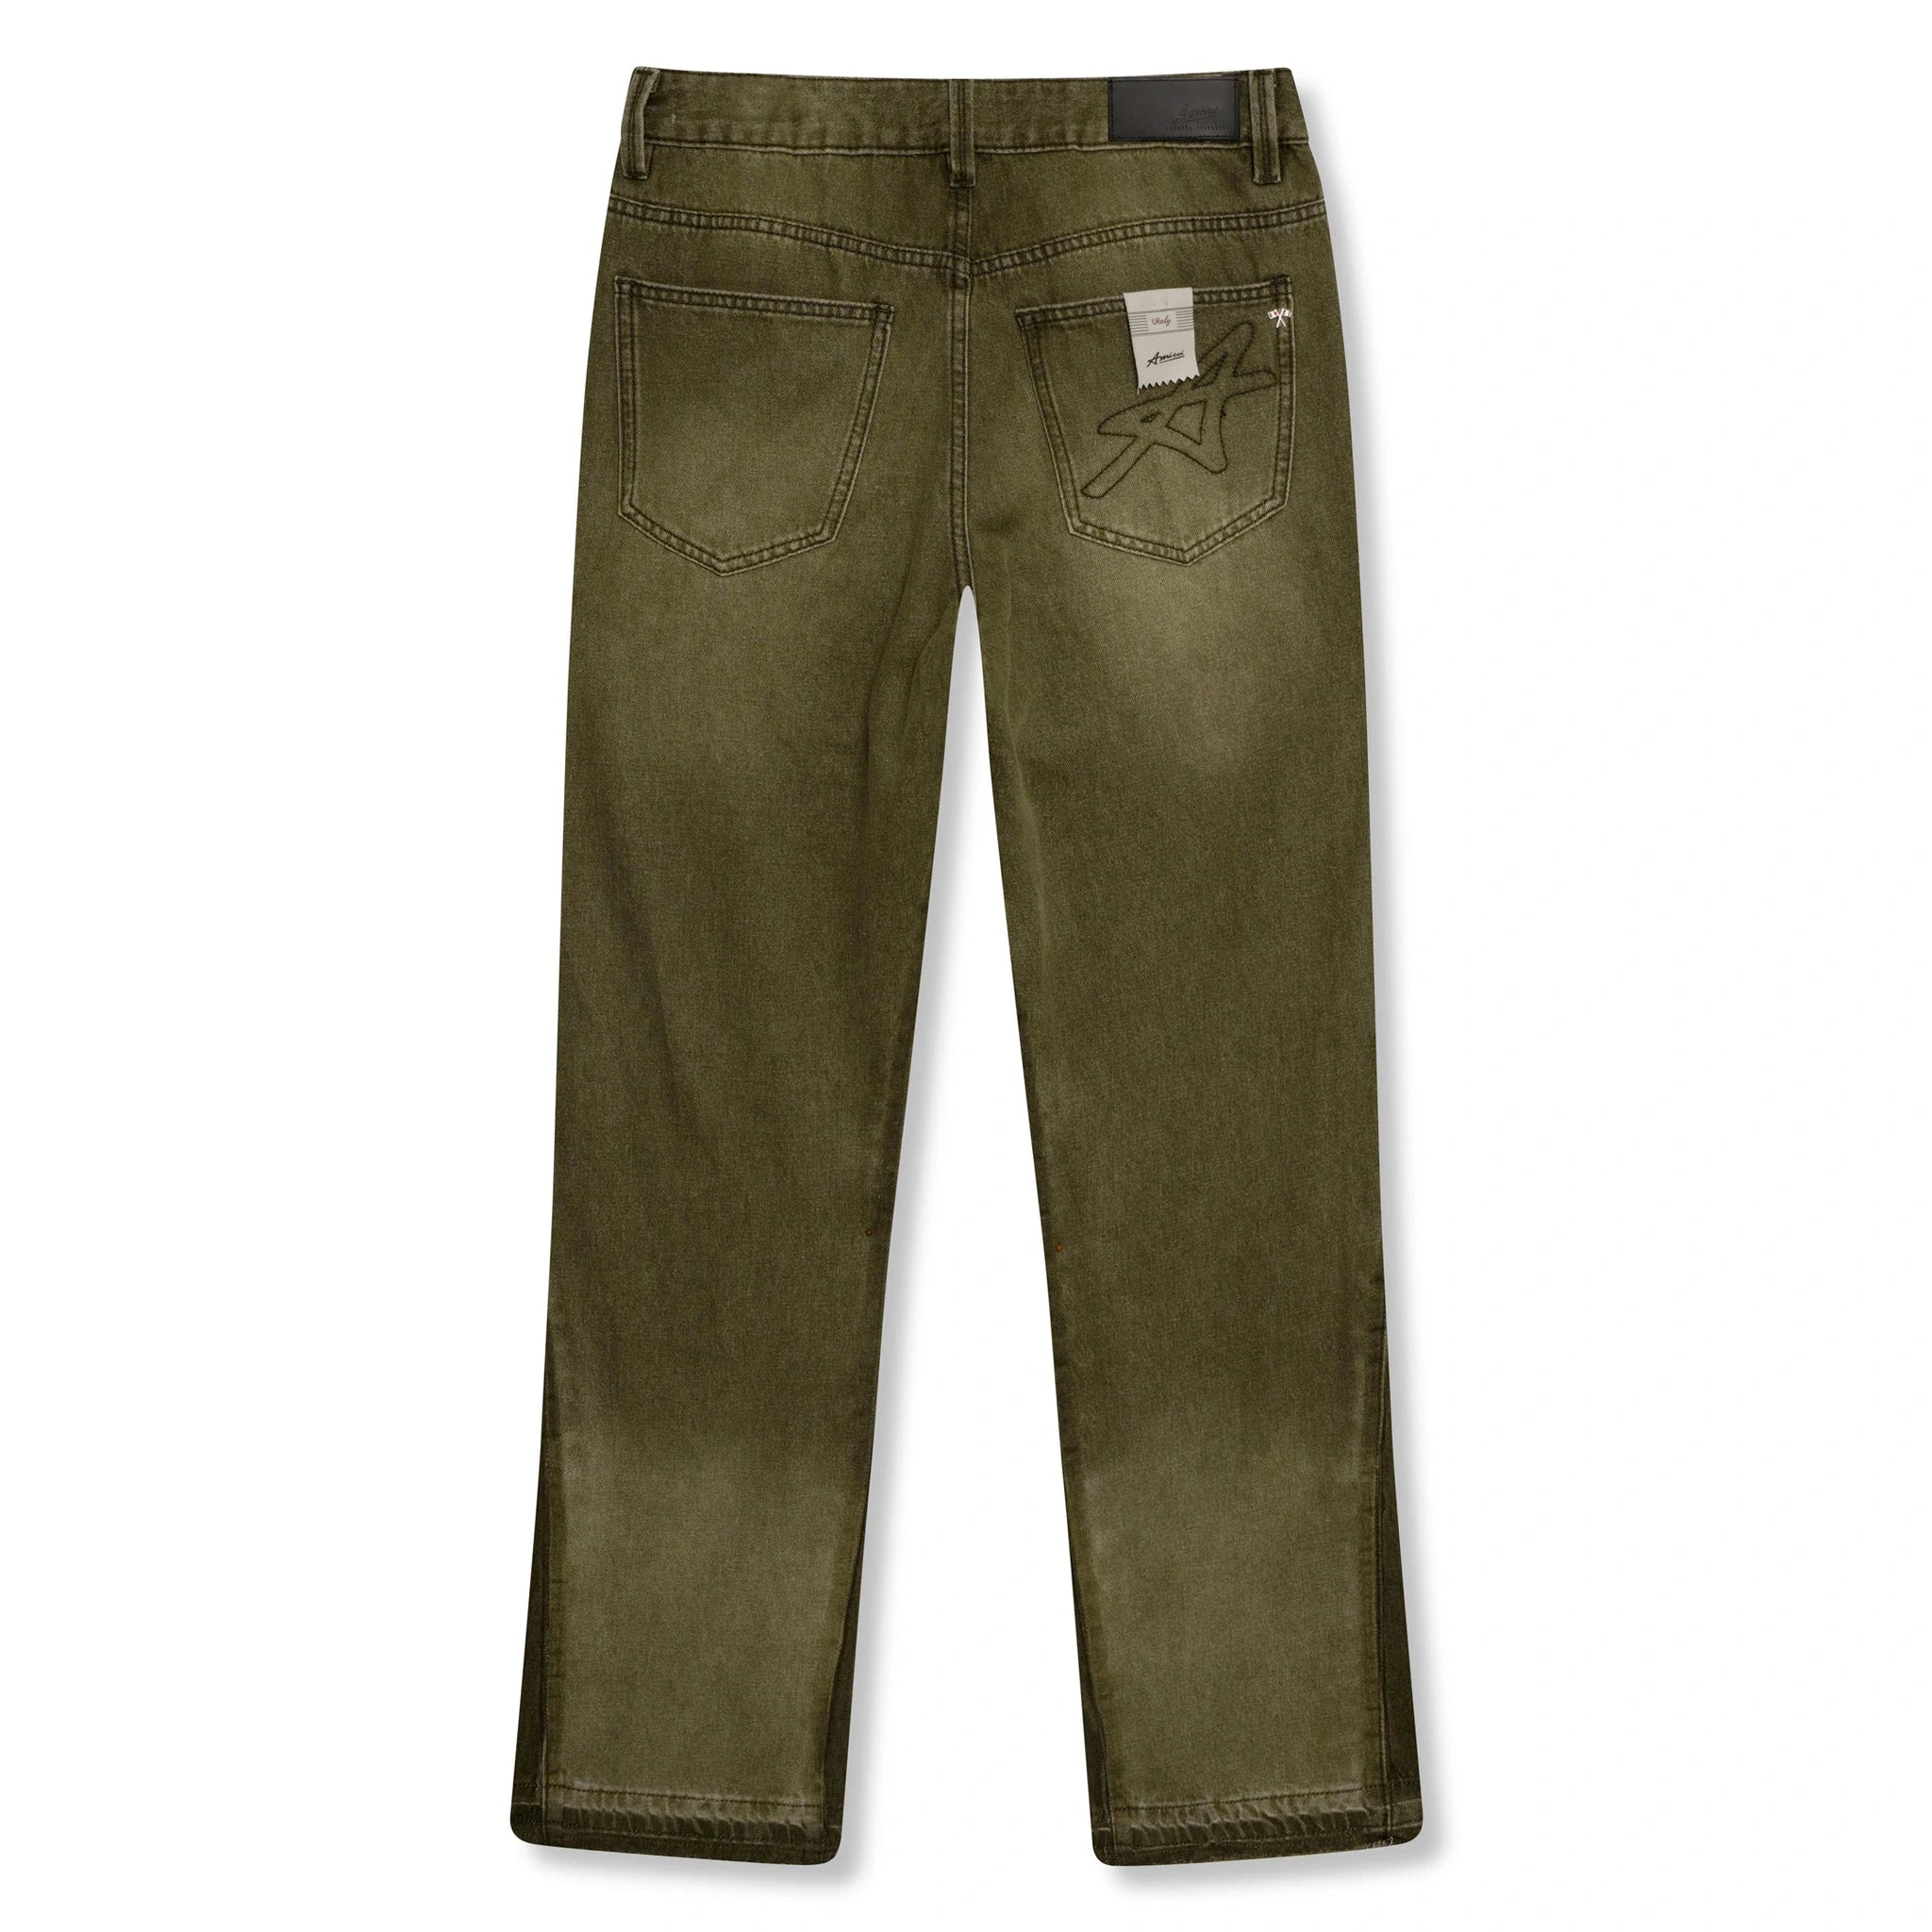 Back view of Amicci Adrano Flare Jeans Olive